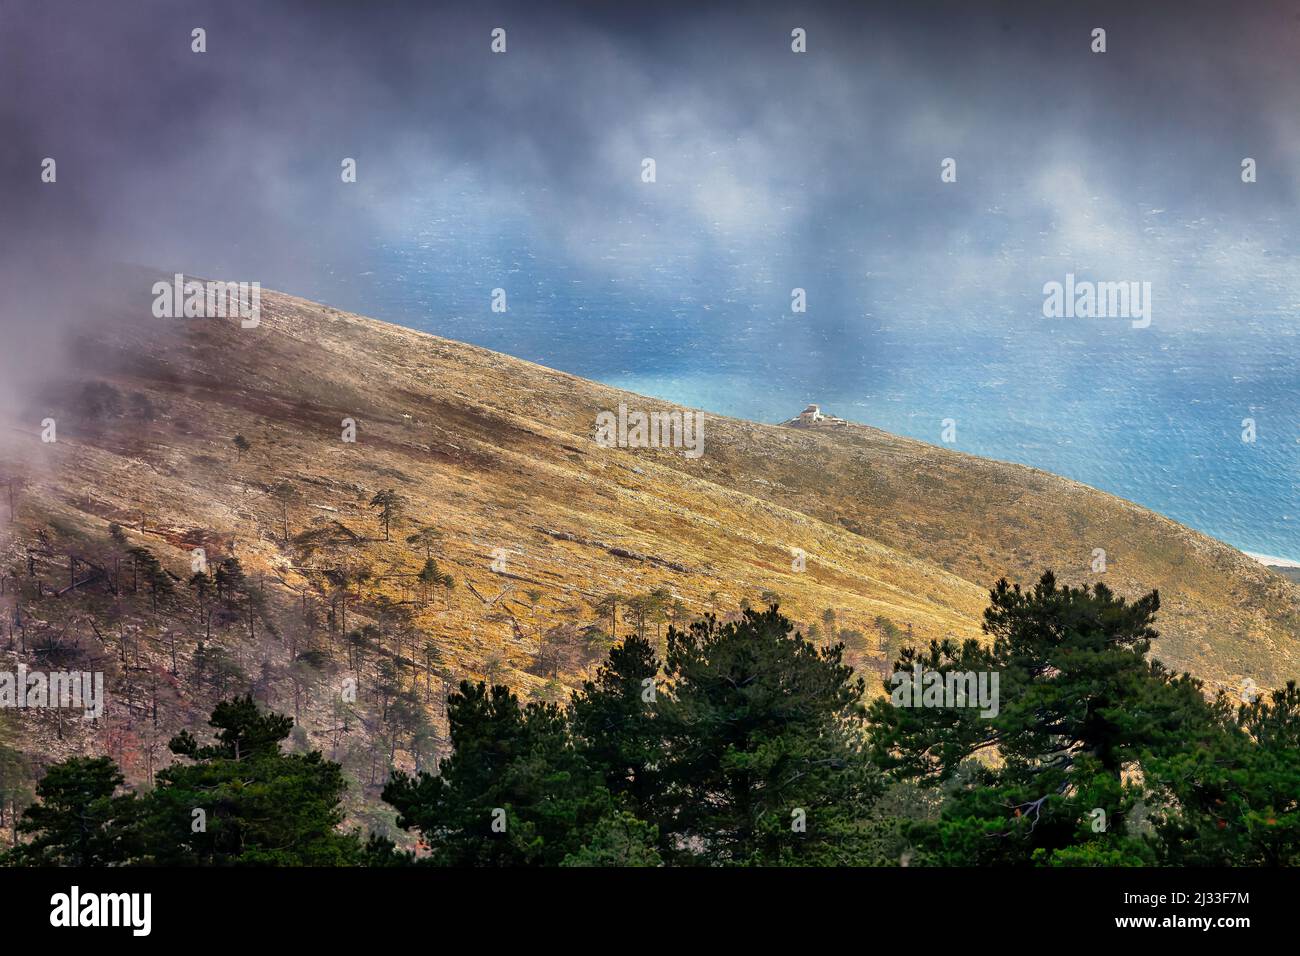 Llogara pass on a very cloudy day in Albania Stock Photo